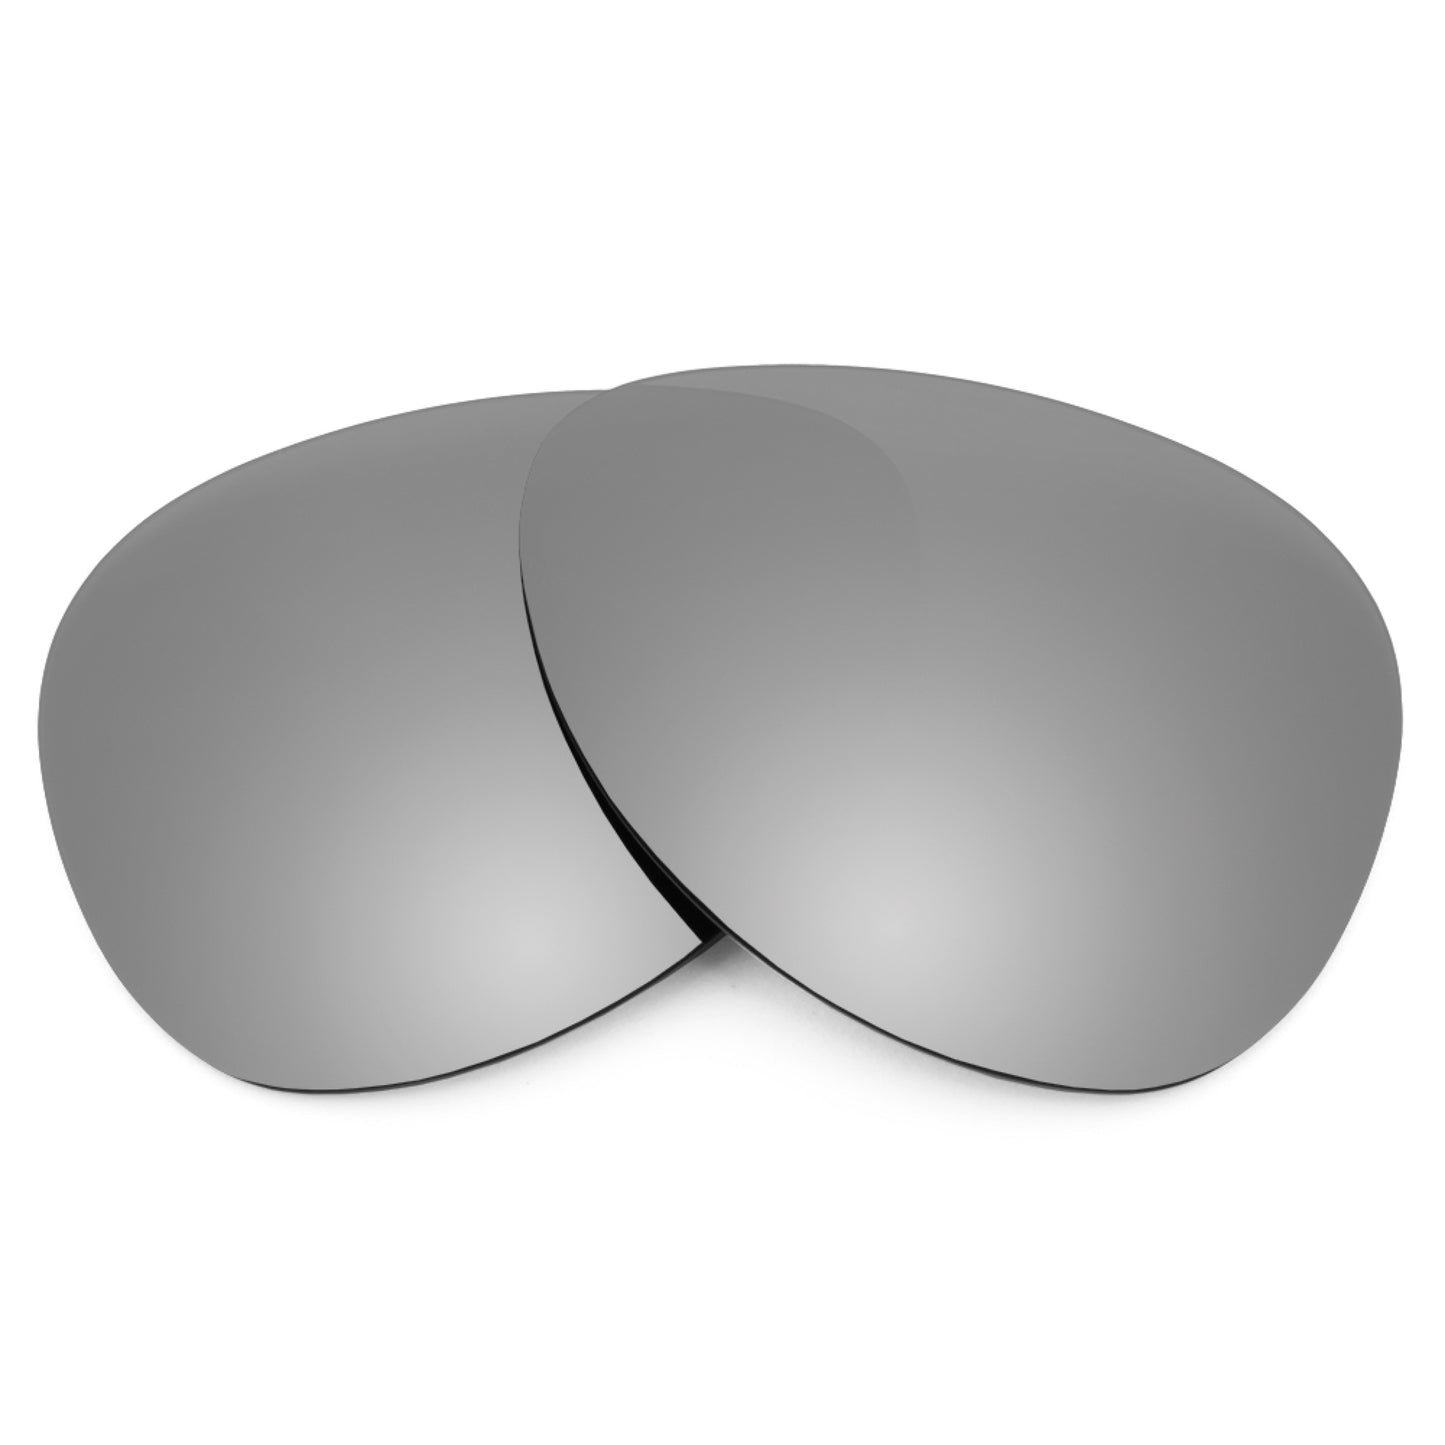 Revant replacement lenses for Ray-Ban Aviator Liteforce RB4180 58mm Non-Polarized Titanium